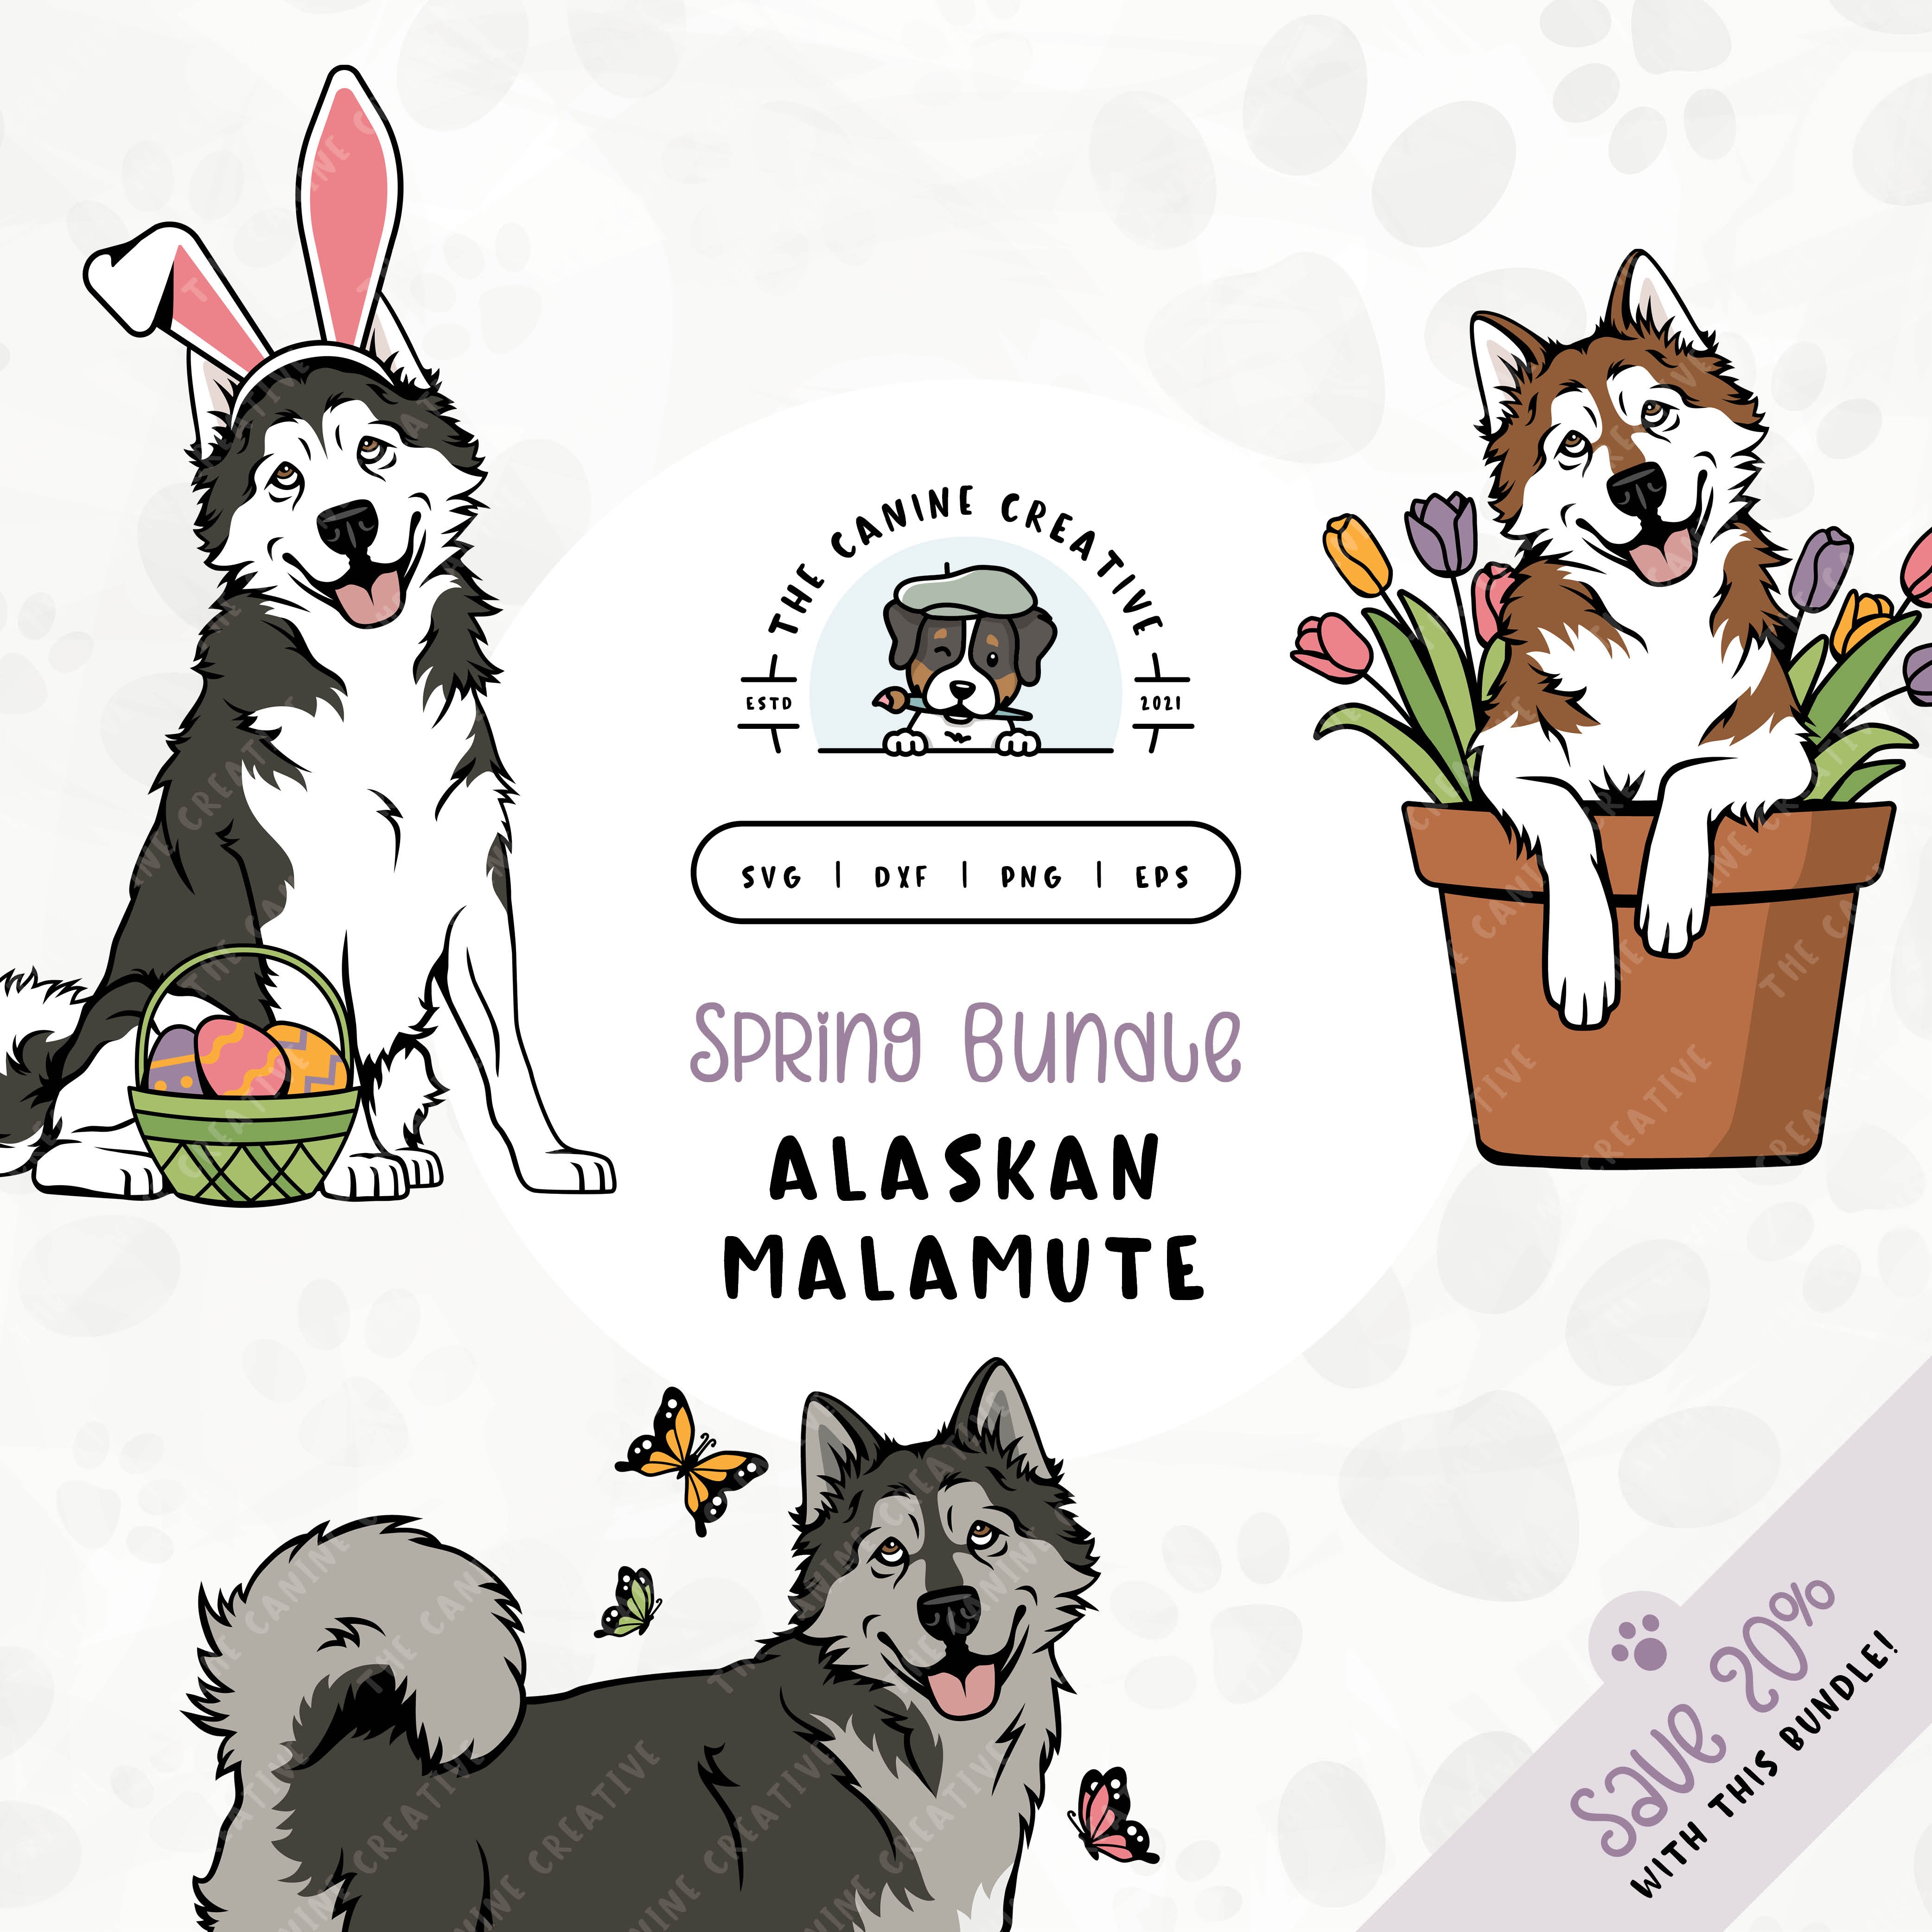 This 3-pack springtime illustration bundle features Alaskan Malamutes among colorful butterflies, peeking out from a pot of vibrant tulips, and wearing festive bunny ears while sitting near a basket of brightly-colored Easter eggs. File formats include: SVG, DXF, PNG, and EPS.